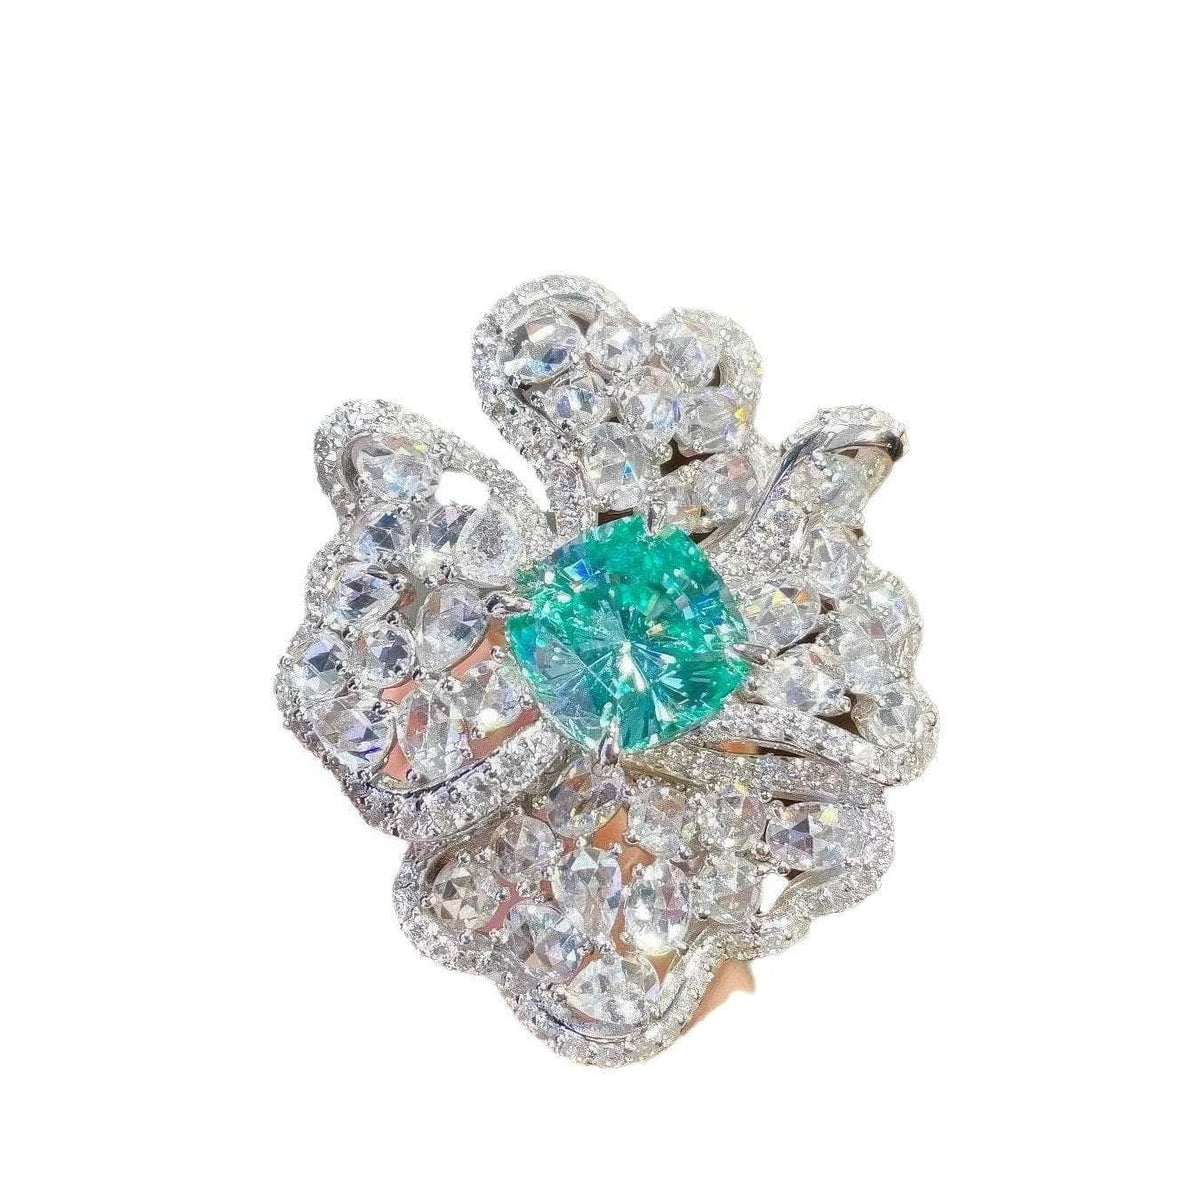 S925 Sterling Silver Lab Imitated Diamond Blue Crystal Cocktail Floral Deco Ring 6 US / Paraiba